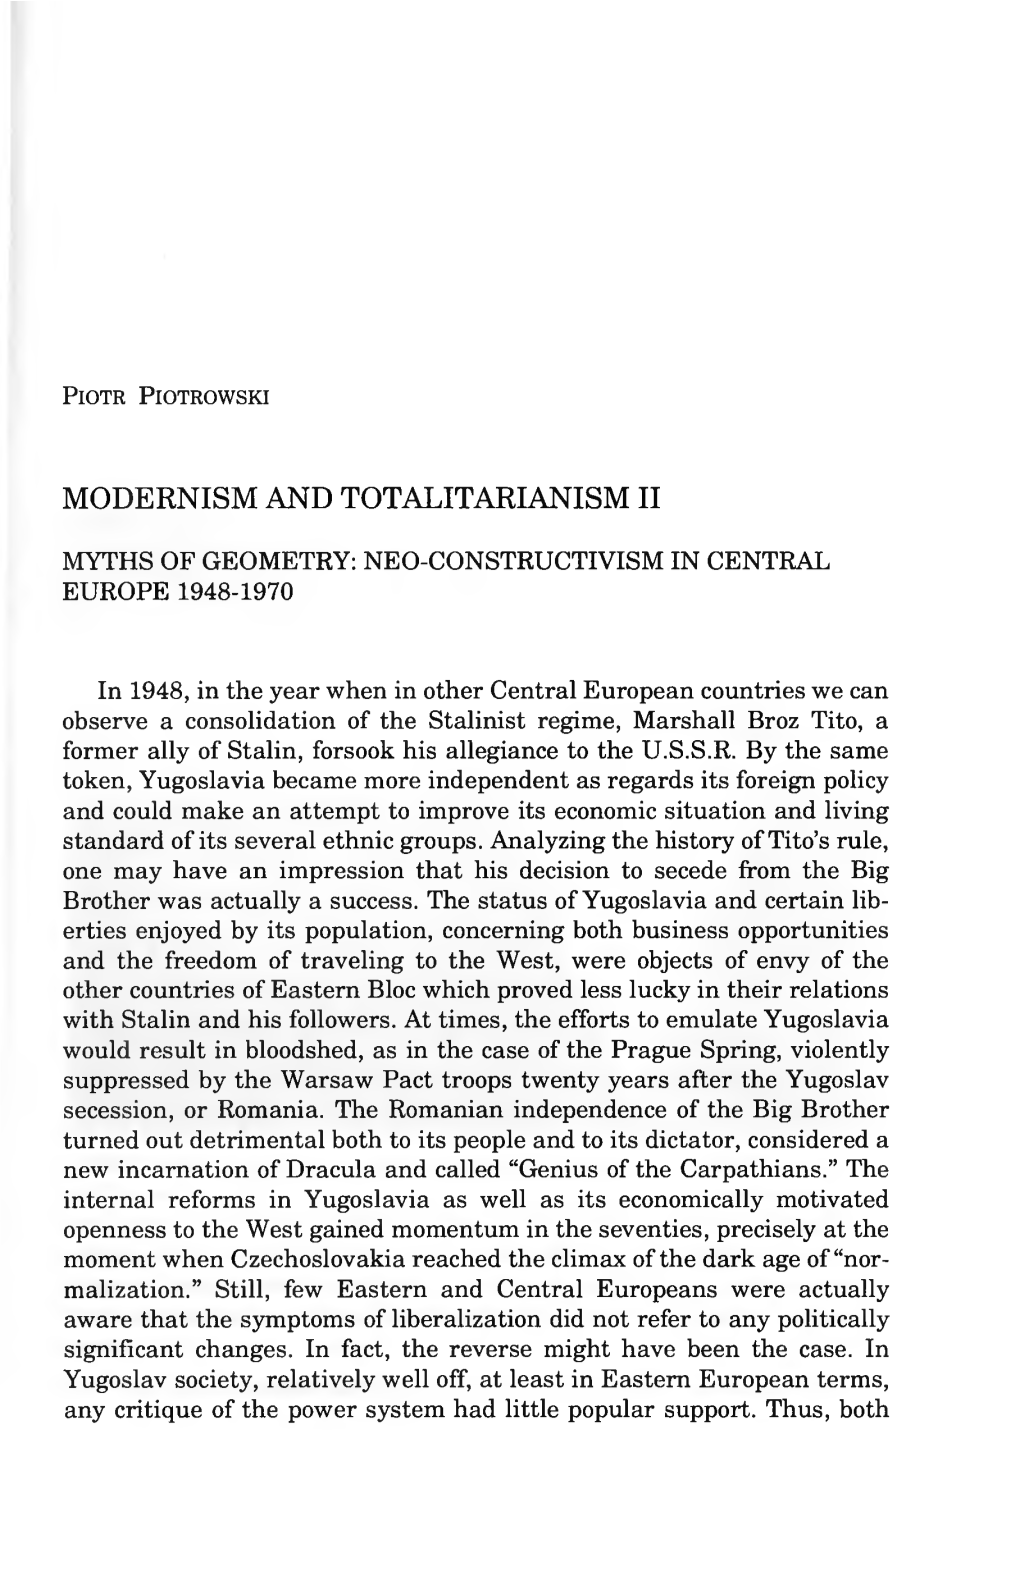 Modernism and Totalitarianism Ii